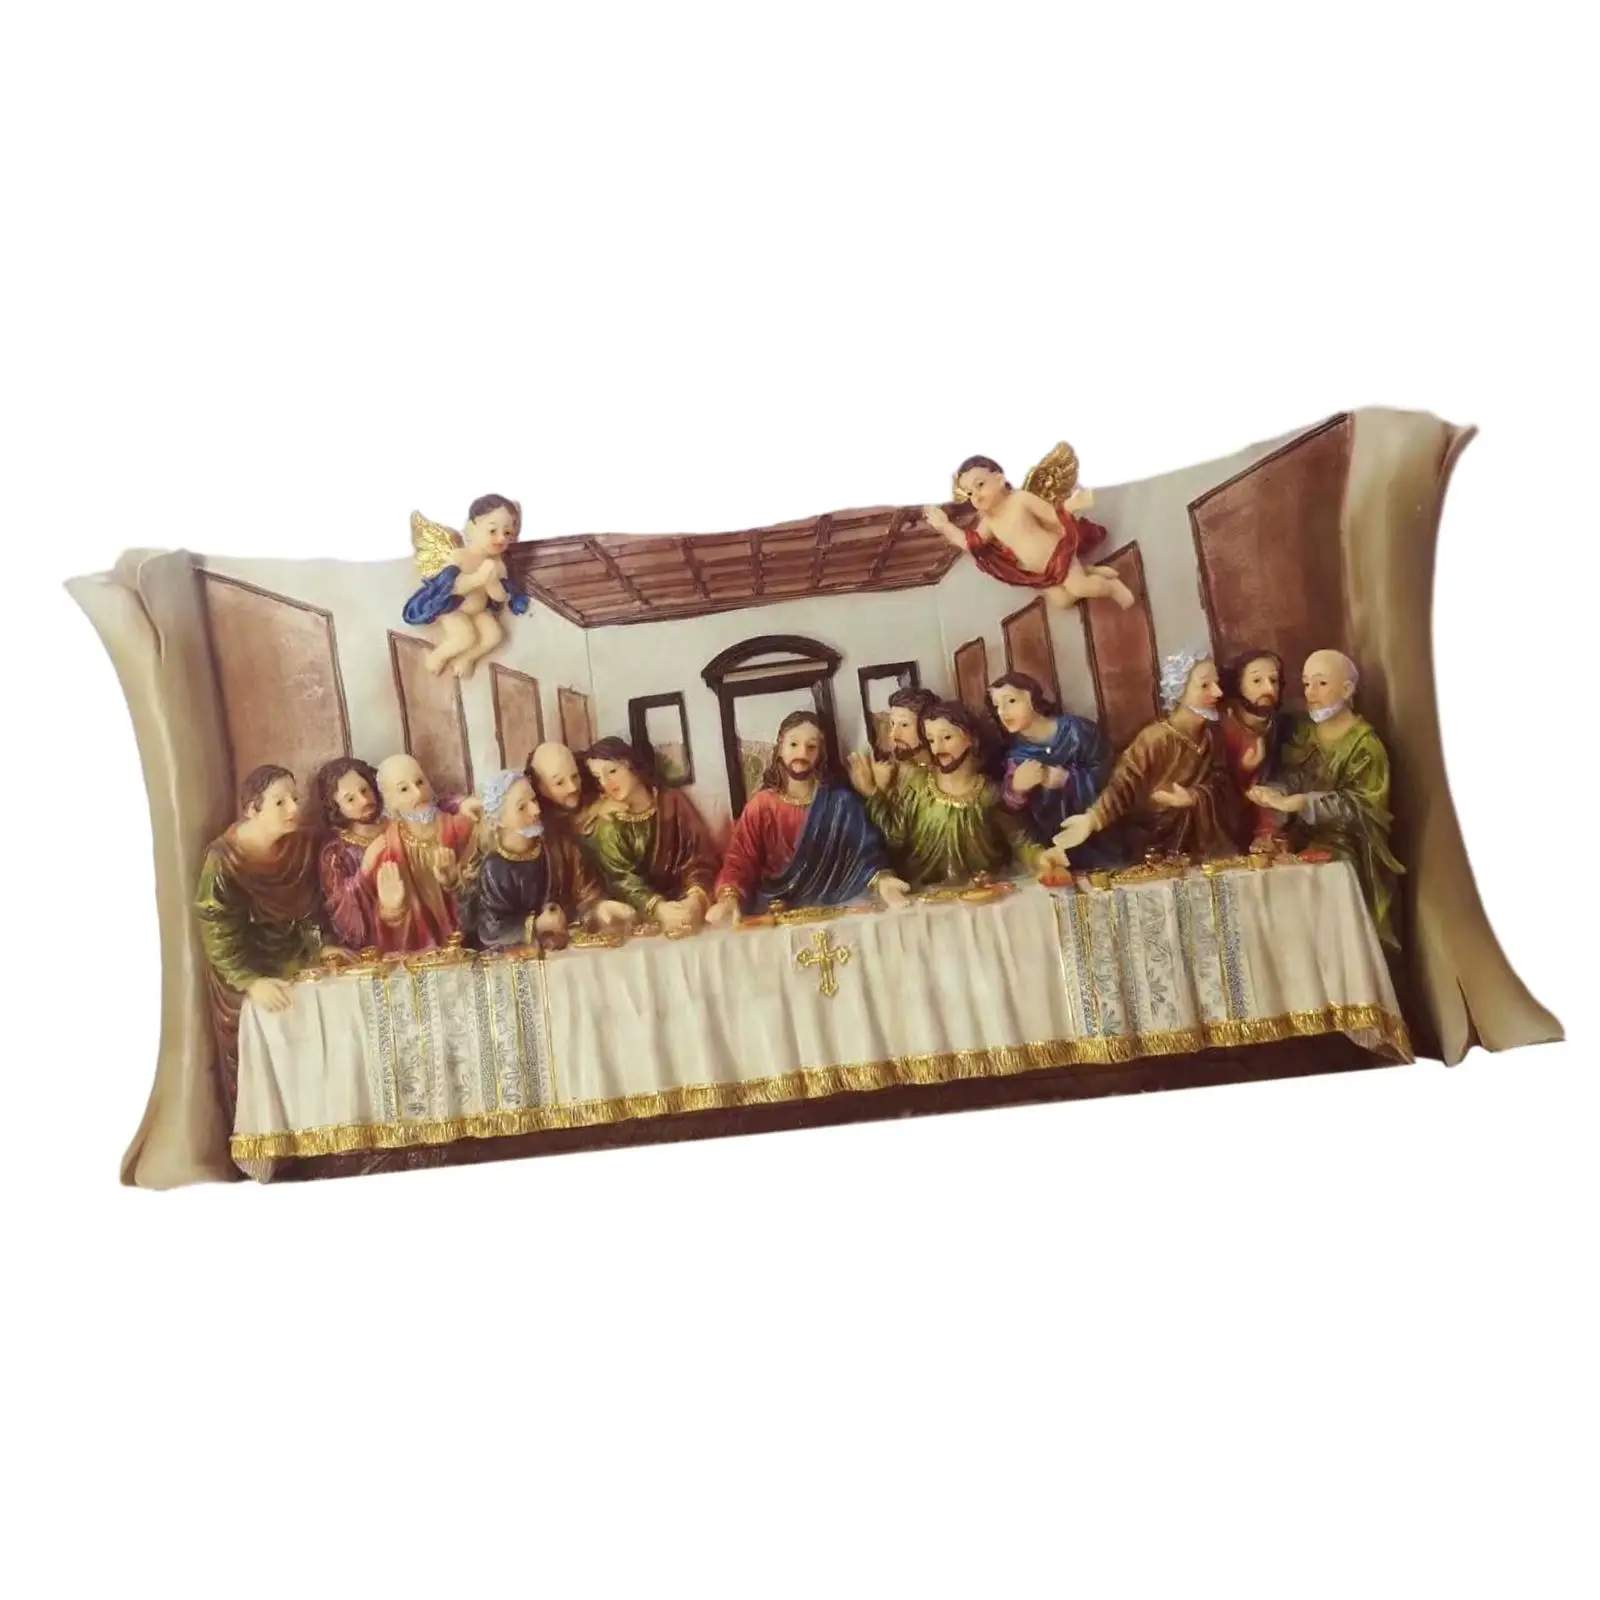 Resin Last Supper Sculpture Statue Artwork Christian Catholic Figurine Crafts Religious Statue for Home Bedroom Office Decor